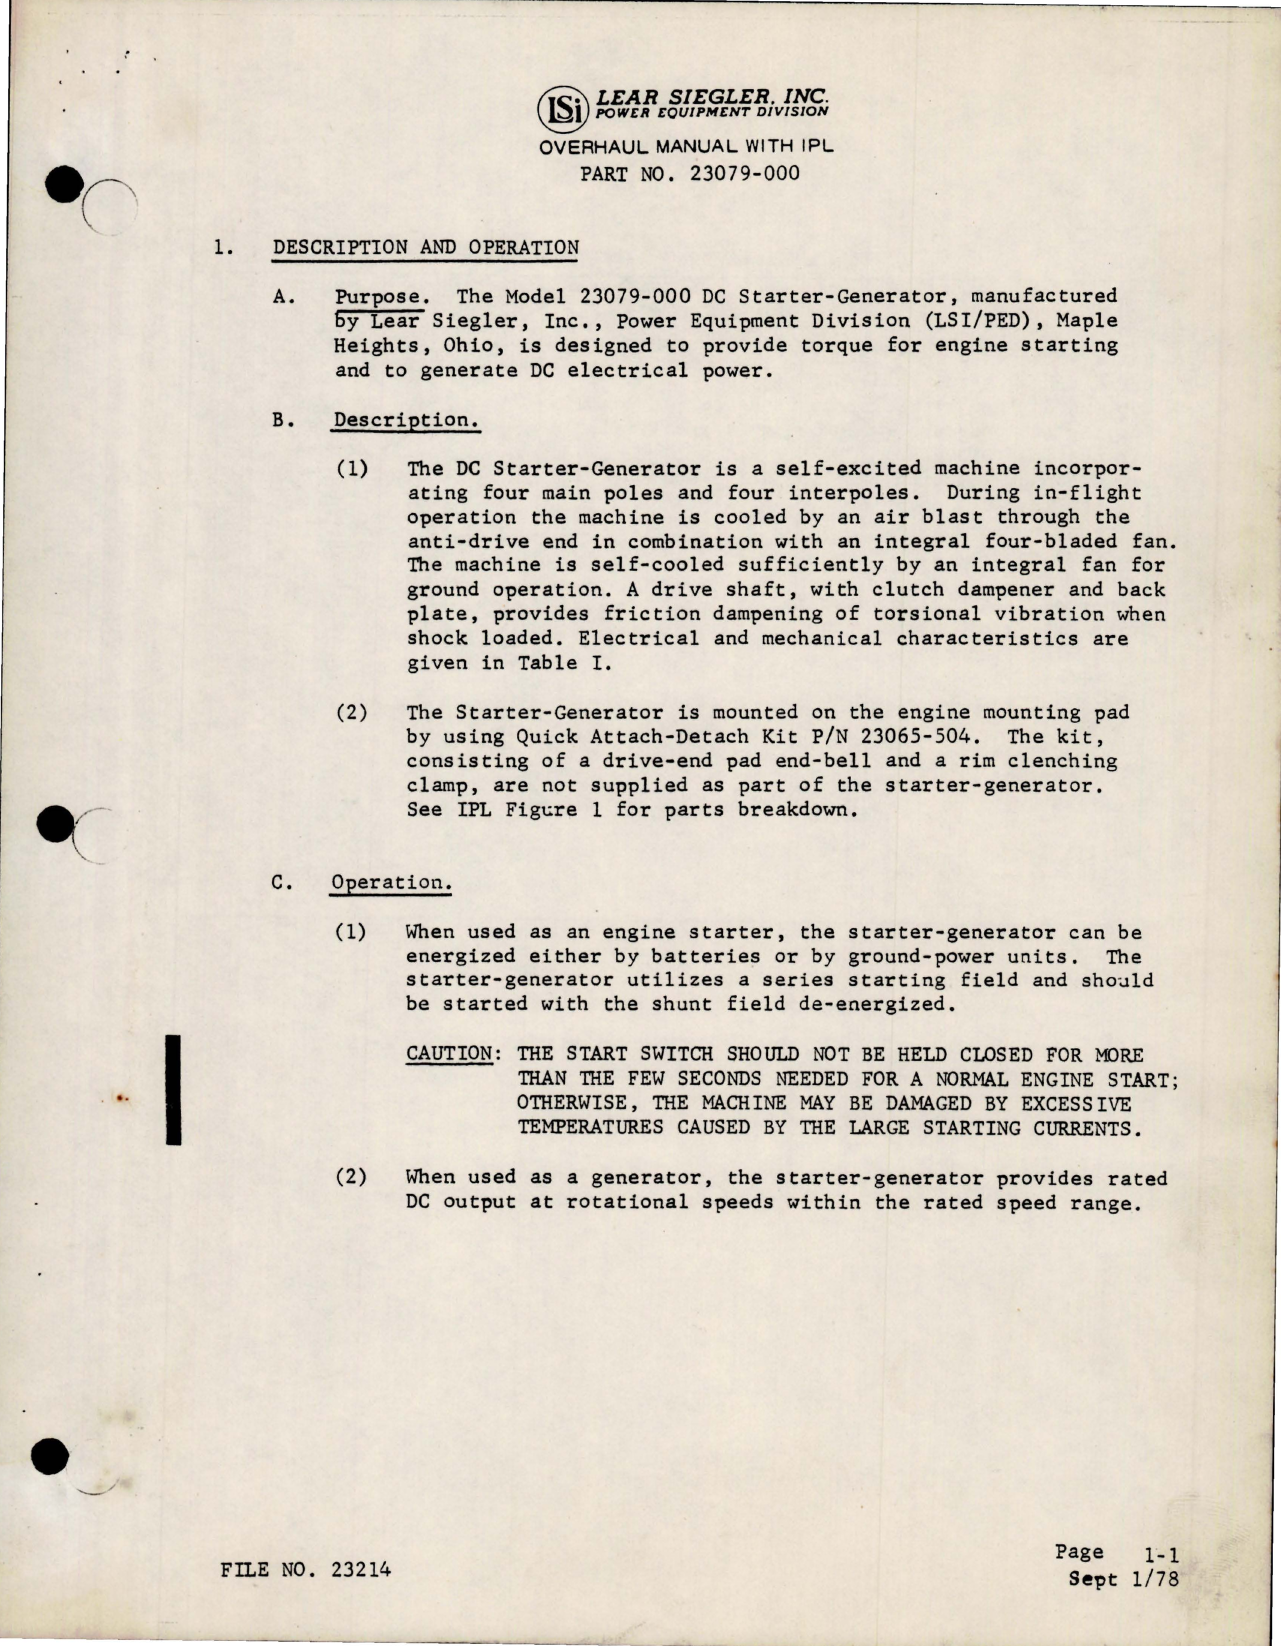 Sample page 7 from AirCorps Library document: Overhaul w Illustrated Parts List for Starter Generator 